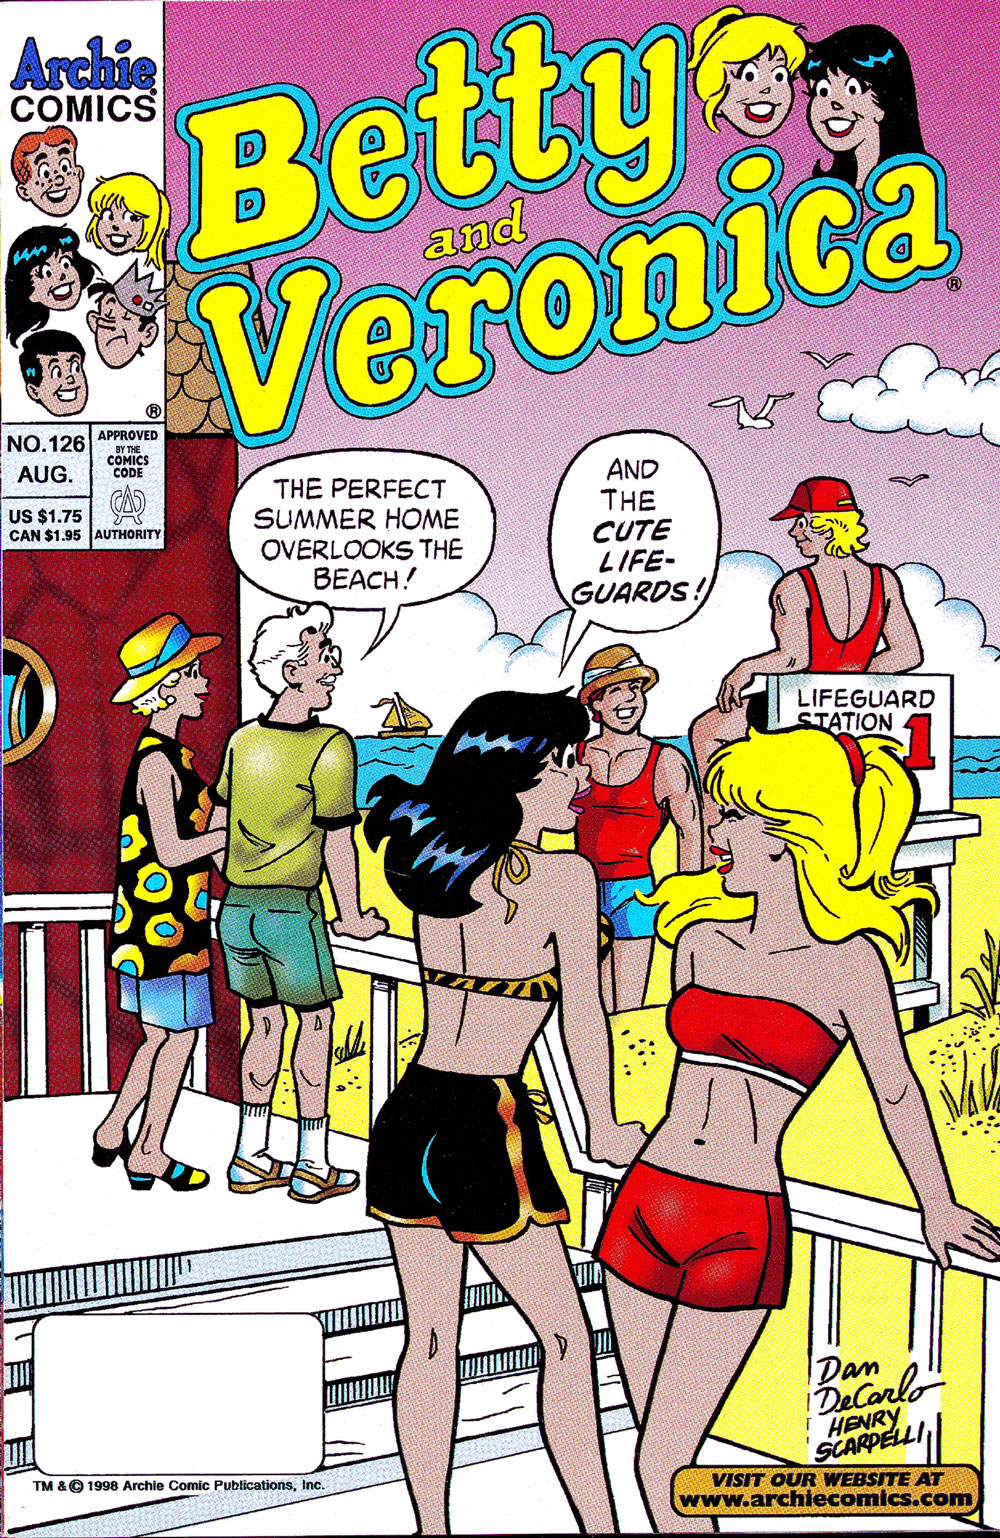 Cover of BETTY AND VERONICA #126. Betty and Veronica are on the beach. Mr. Lodge comments about the great view, and Veronica says it's a great view of the cute lifeguards.